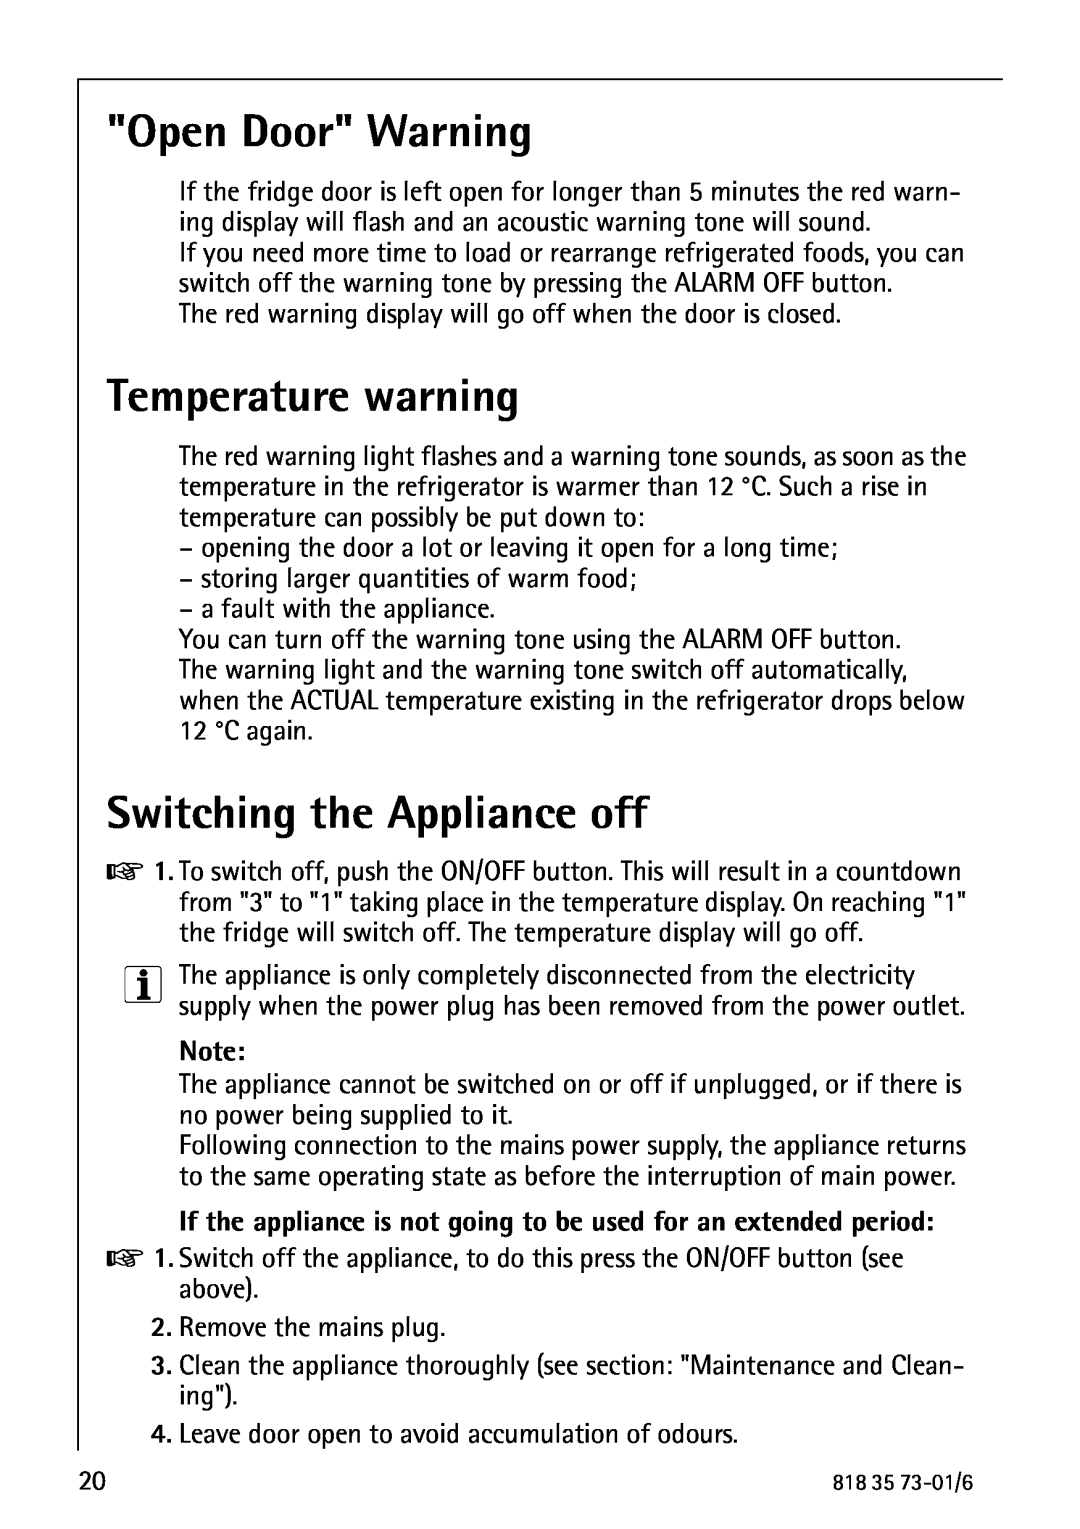 Electrolux SANTO 72340 KA operating instructions Open Door Warning, Temperature warning, Switching the Appliance off 